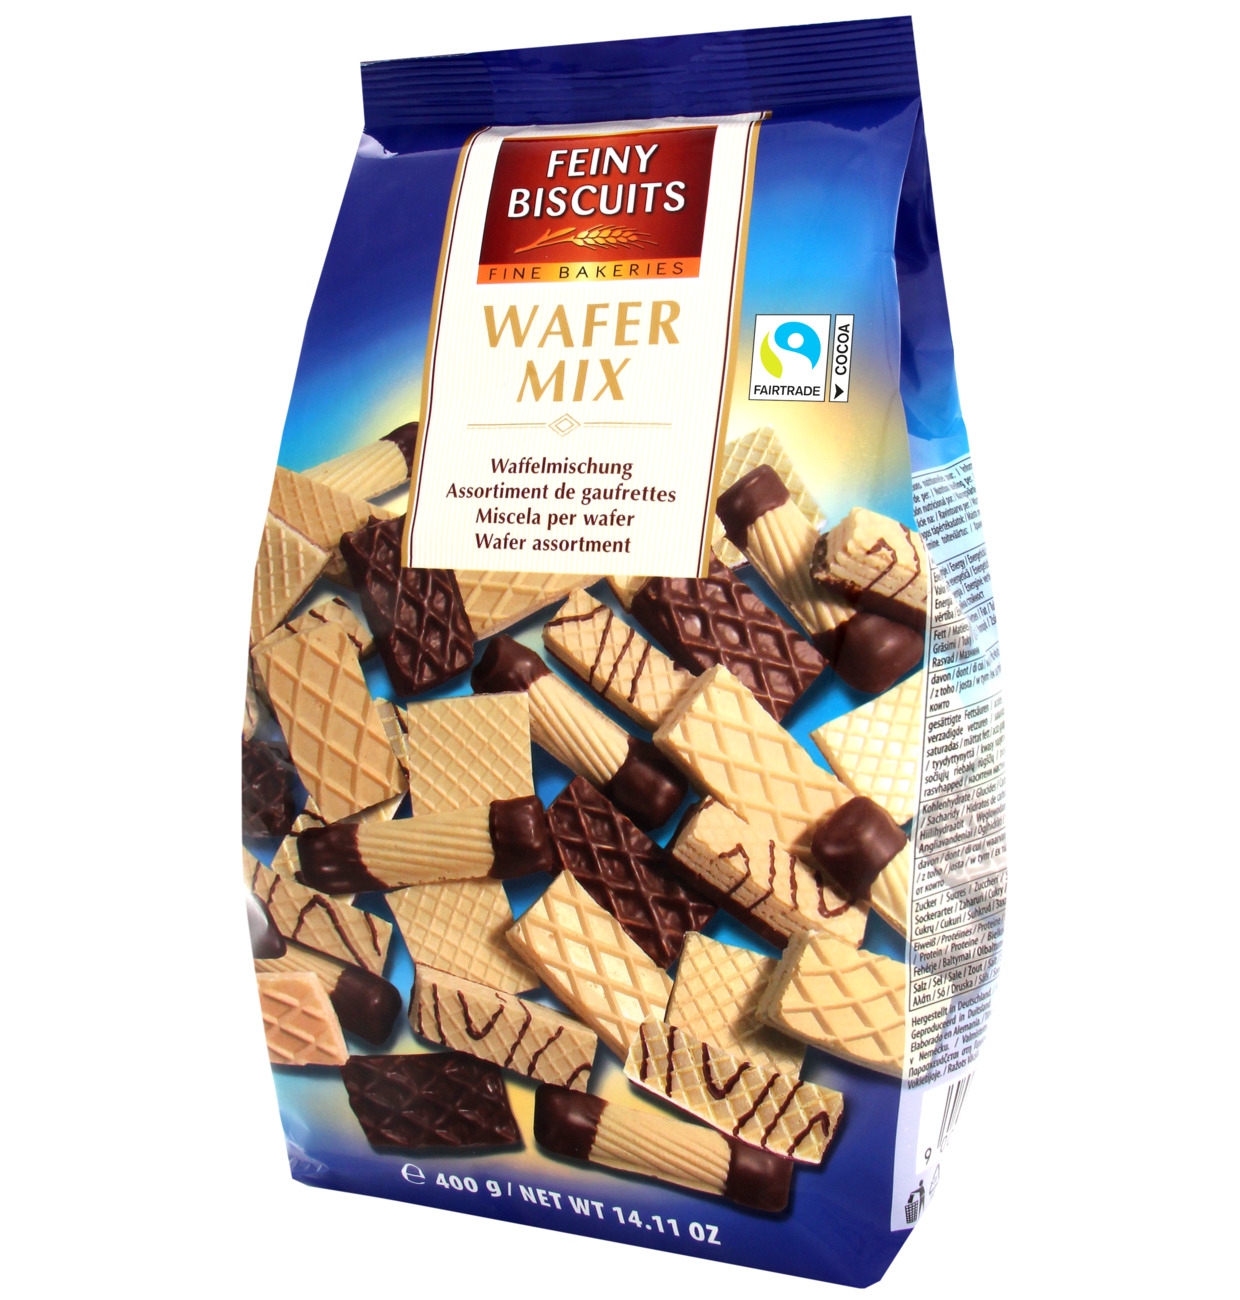 Feiny Biscuits Vohveli mix 400g